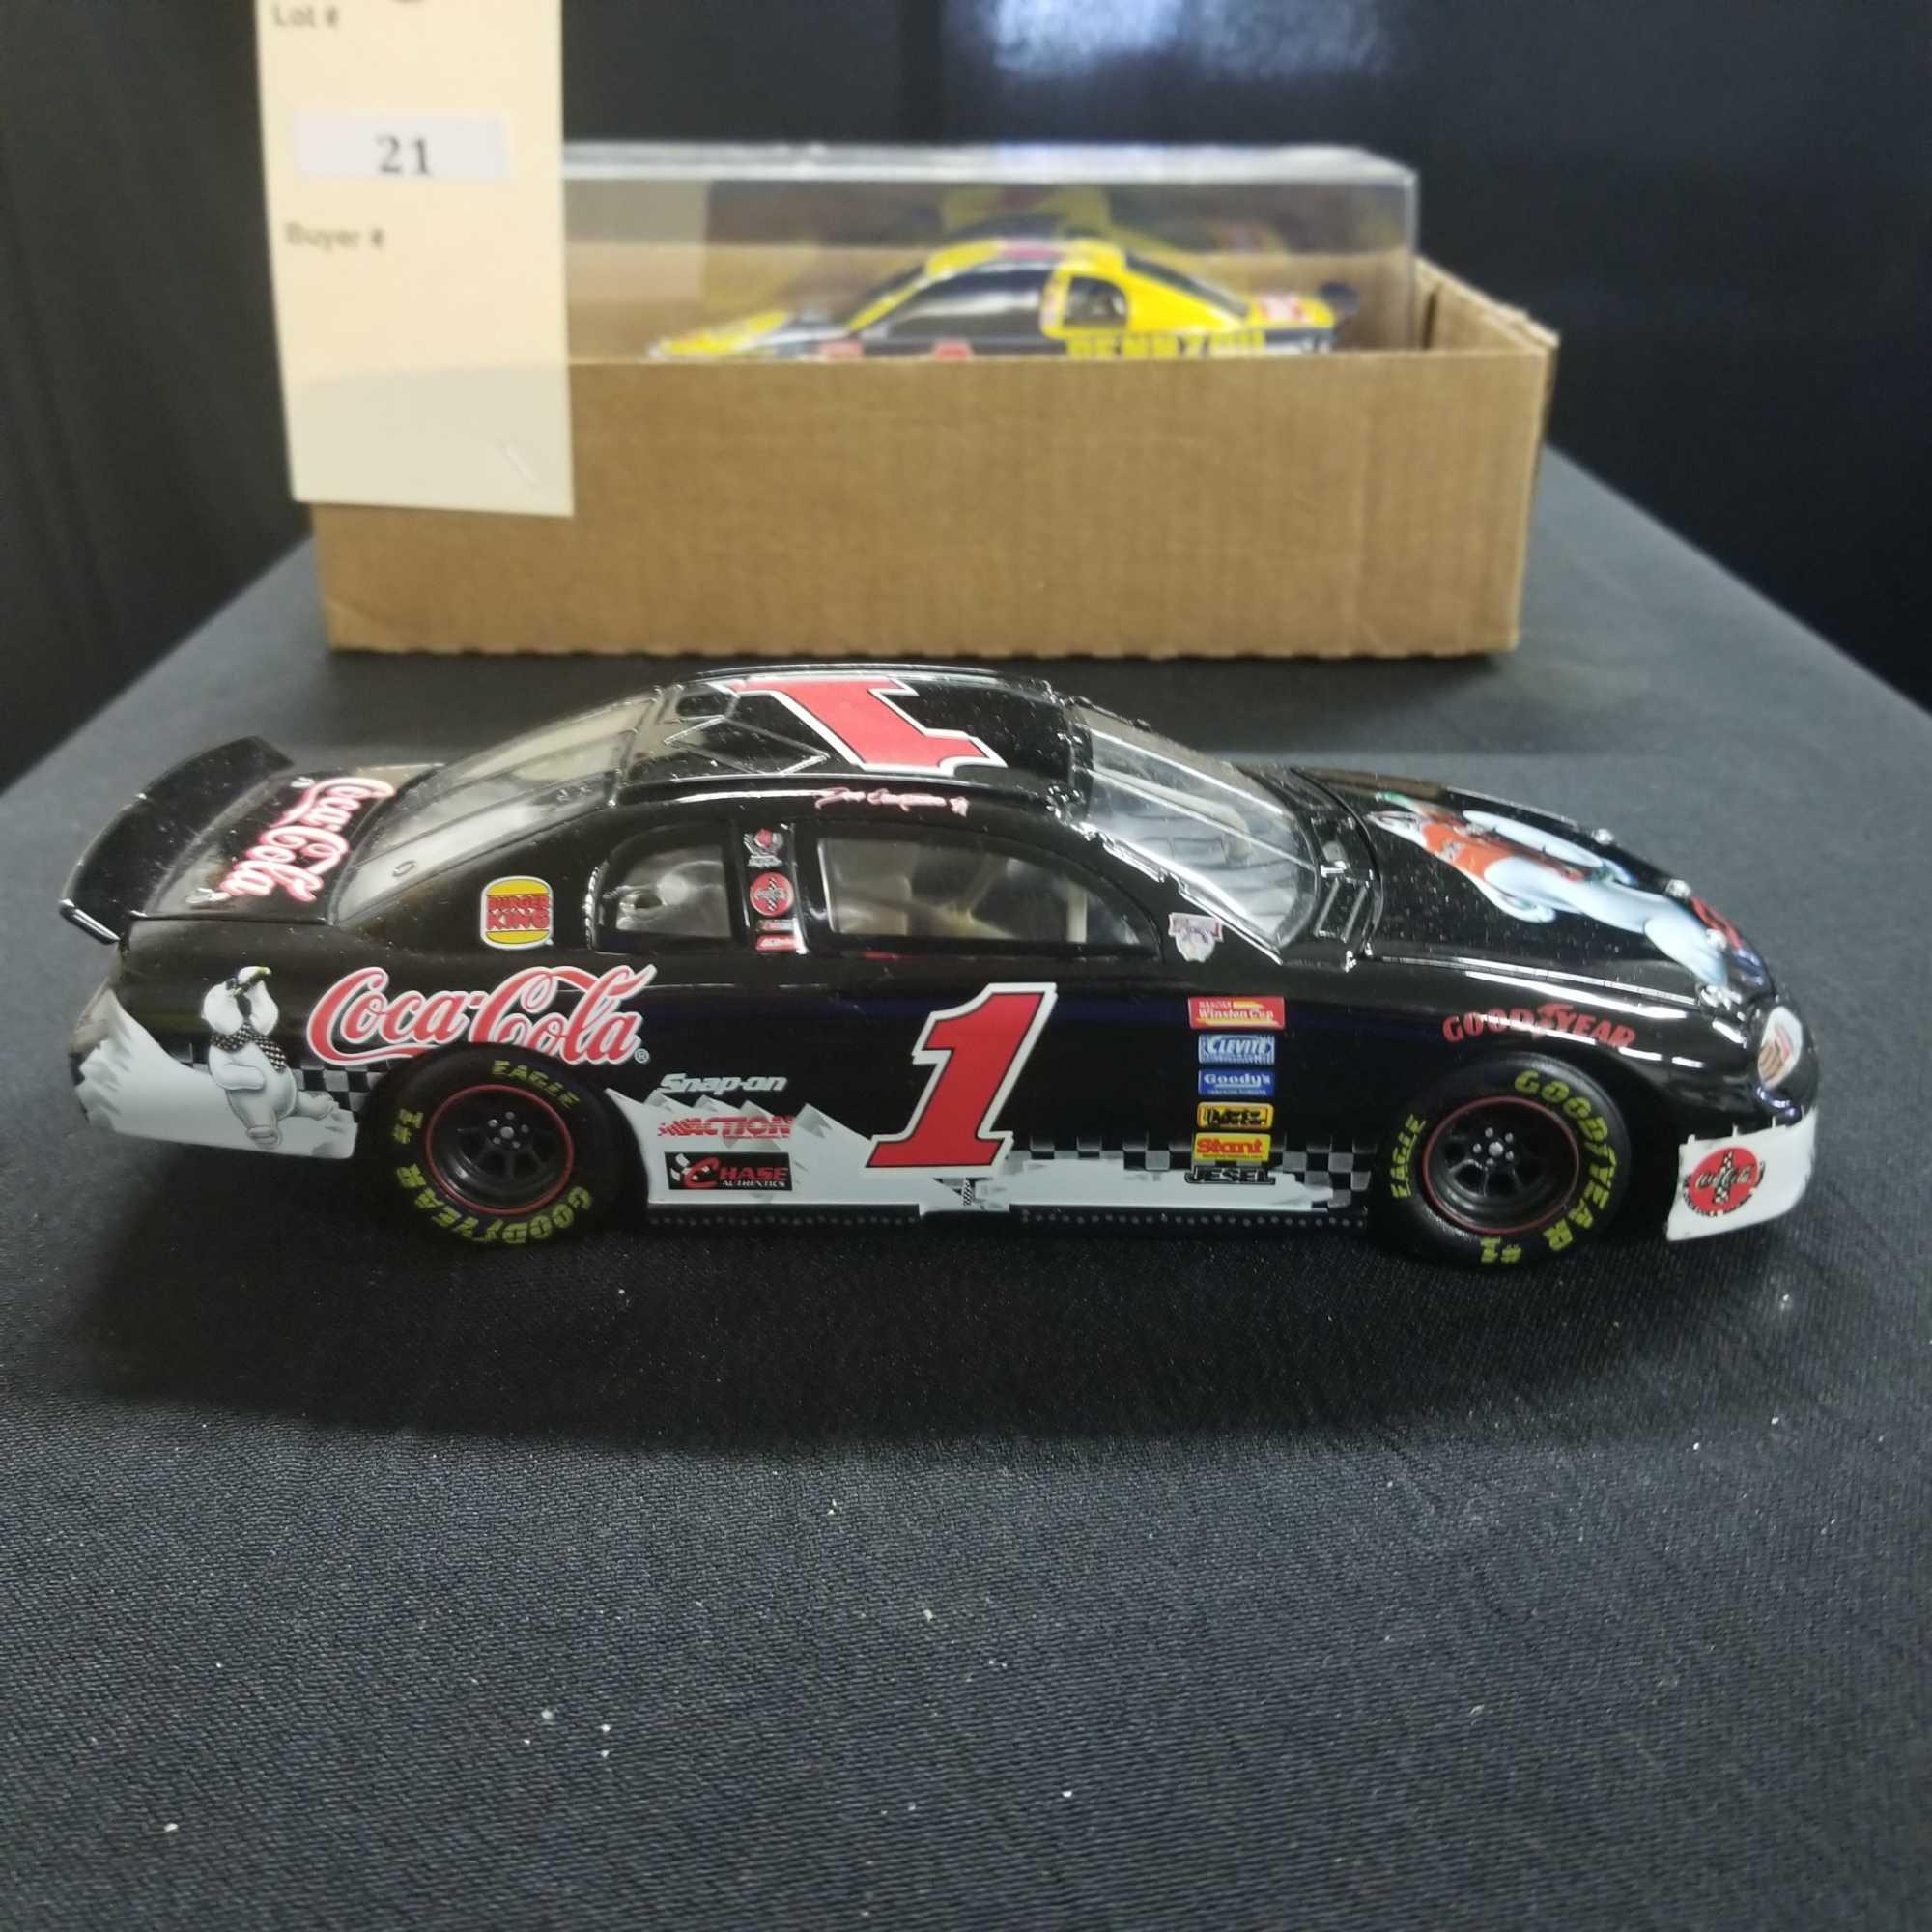 2ct. 1/24 Scale Ertl and Action, NASCARS, Dale Earnhardt, Jr. Car #1